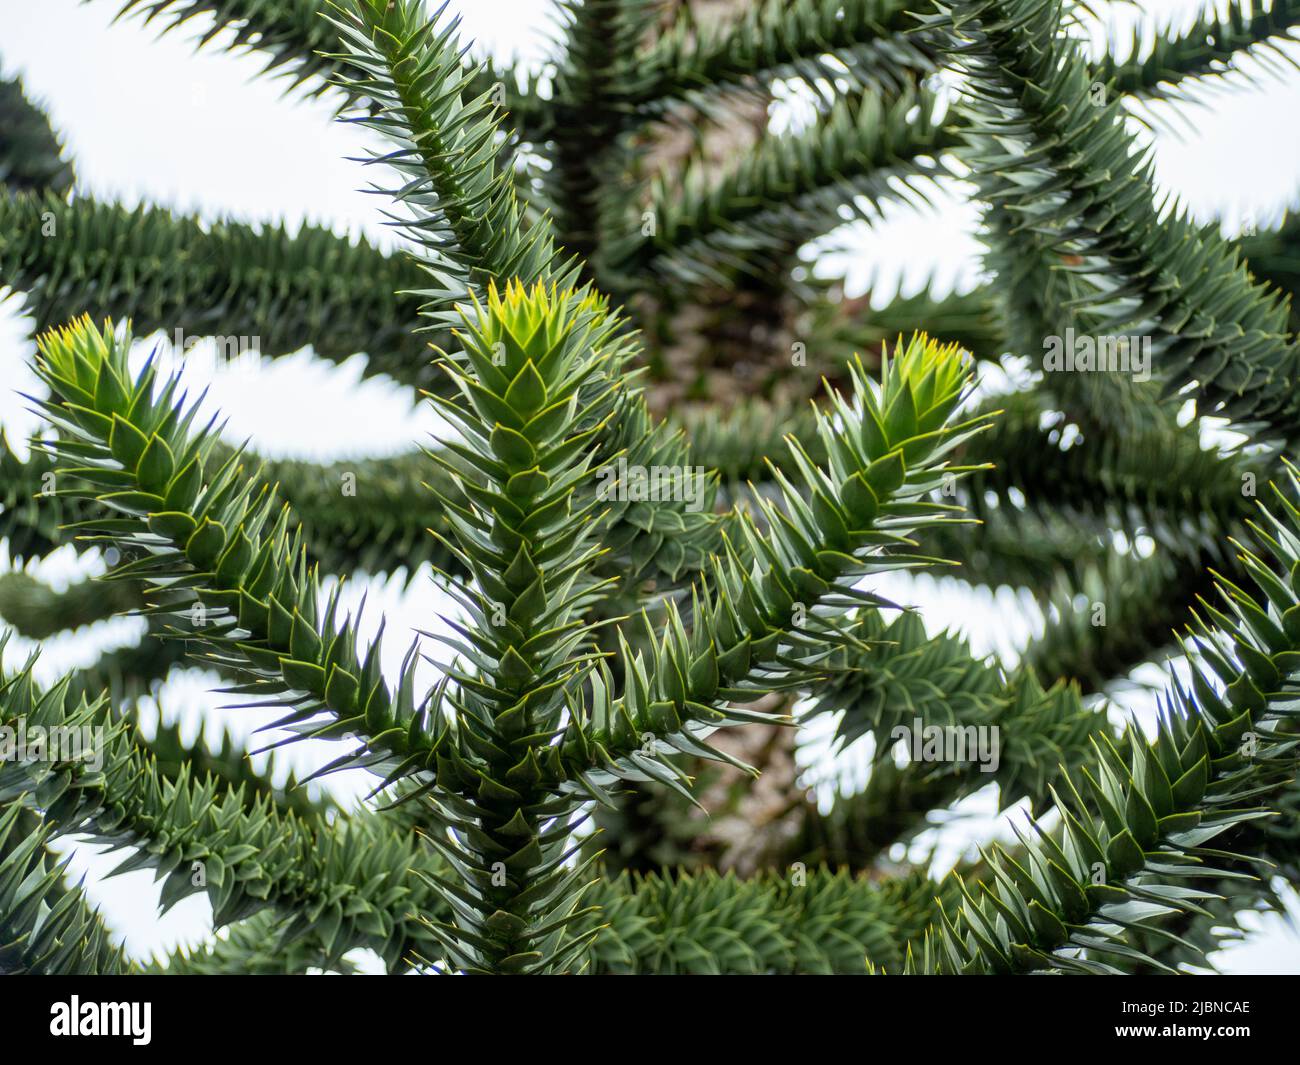 Chilean Araucaria, also called Andenfir, Chilean Spruce, Snake Tree, Rock Spruce, Monkey Tail, Chilean Ornamental Spruce, or Puzzle Monkey Tree. Stock Photo